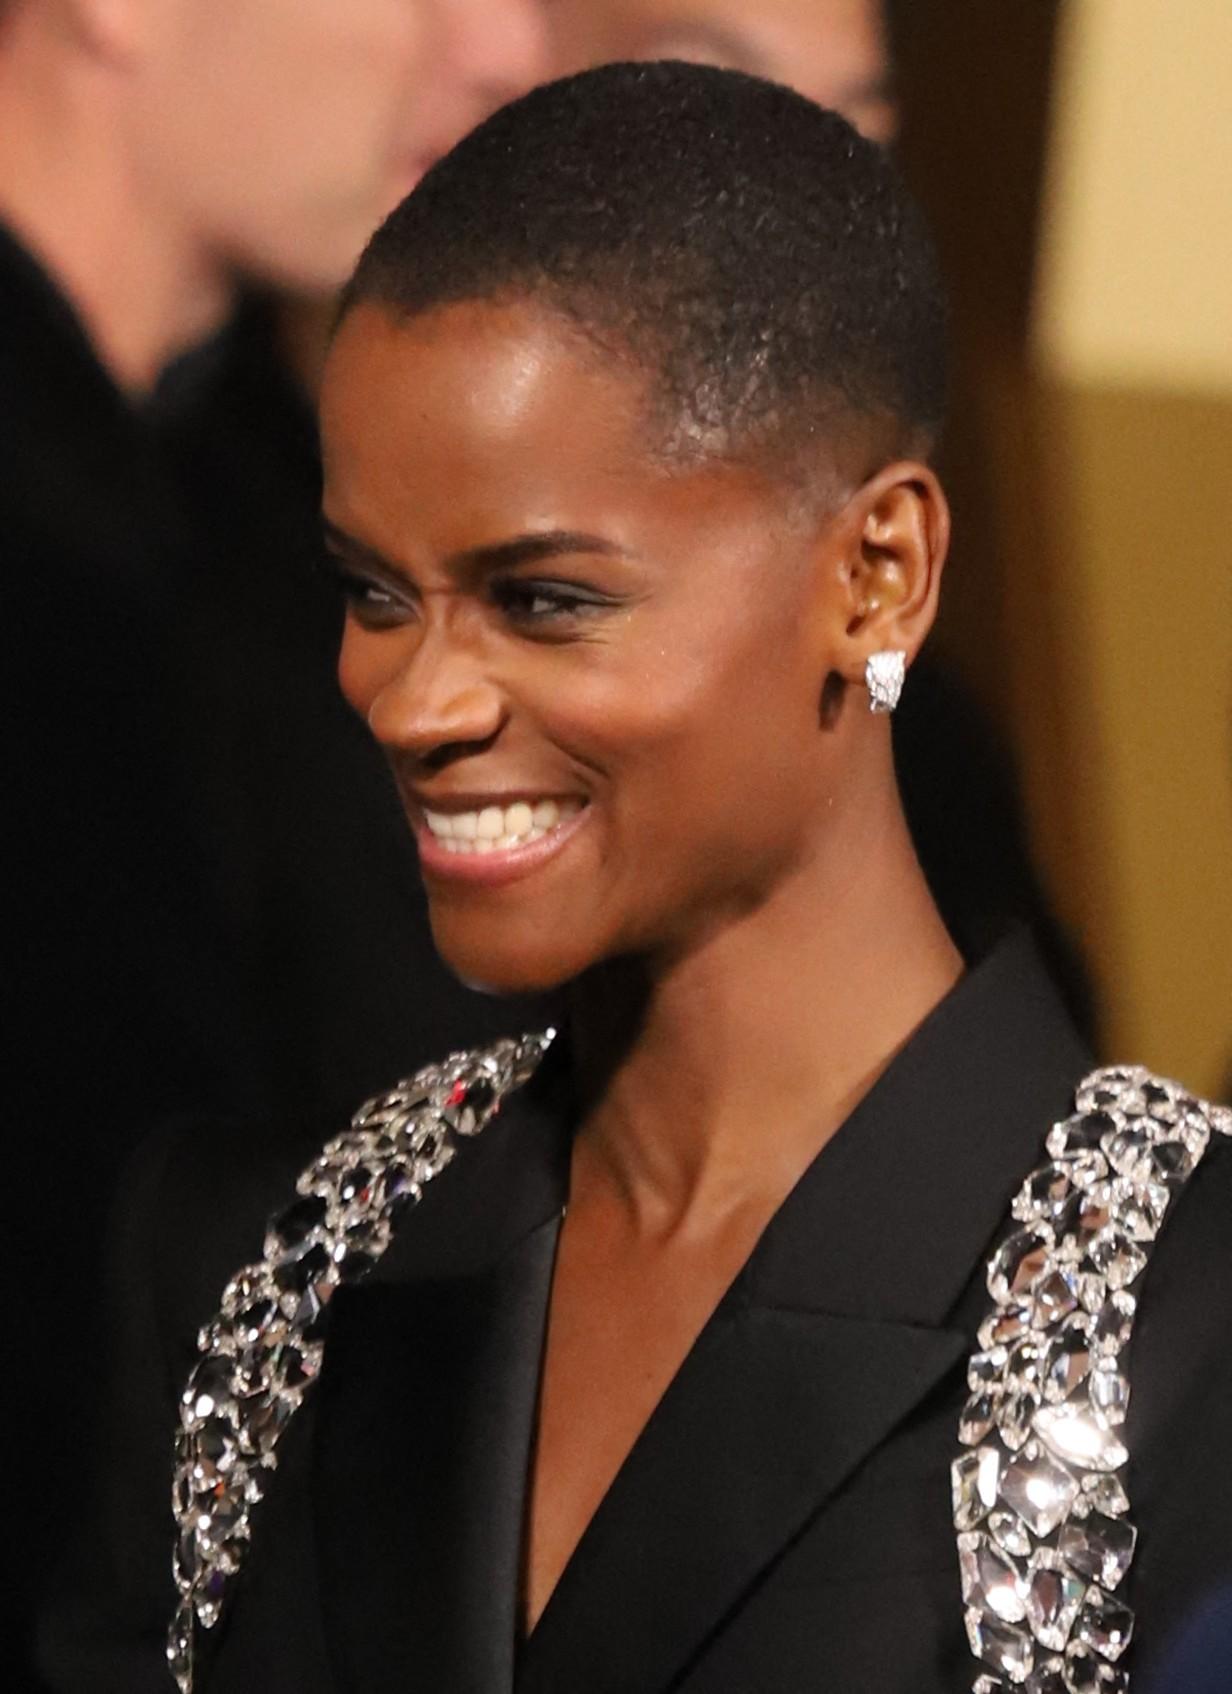 Letitia Wright at the red carpet Hollywood Premiere of "Black Panther 2".